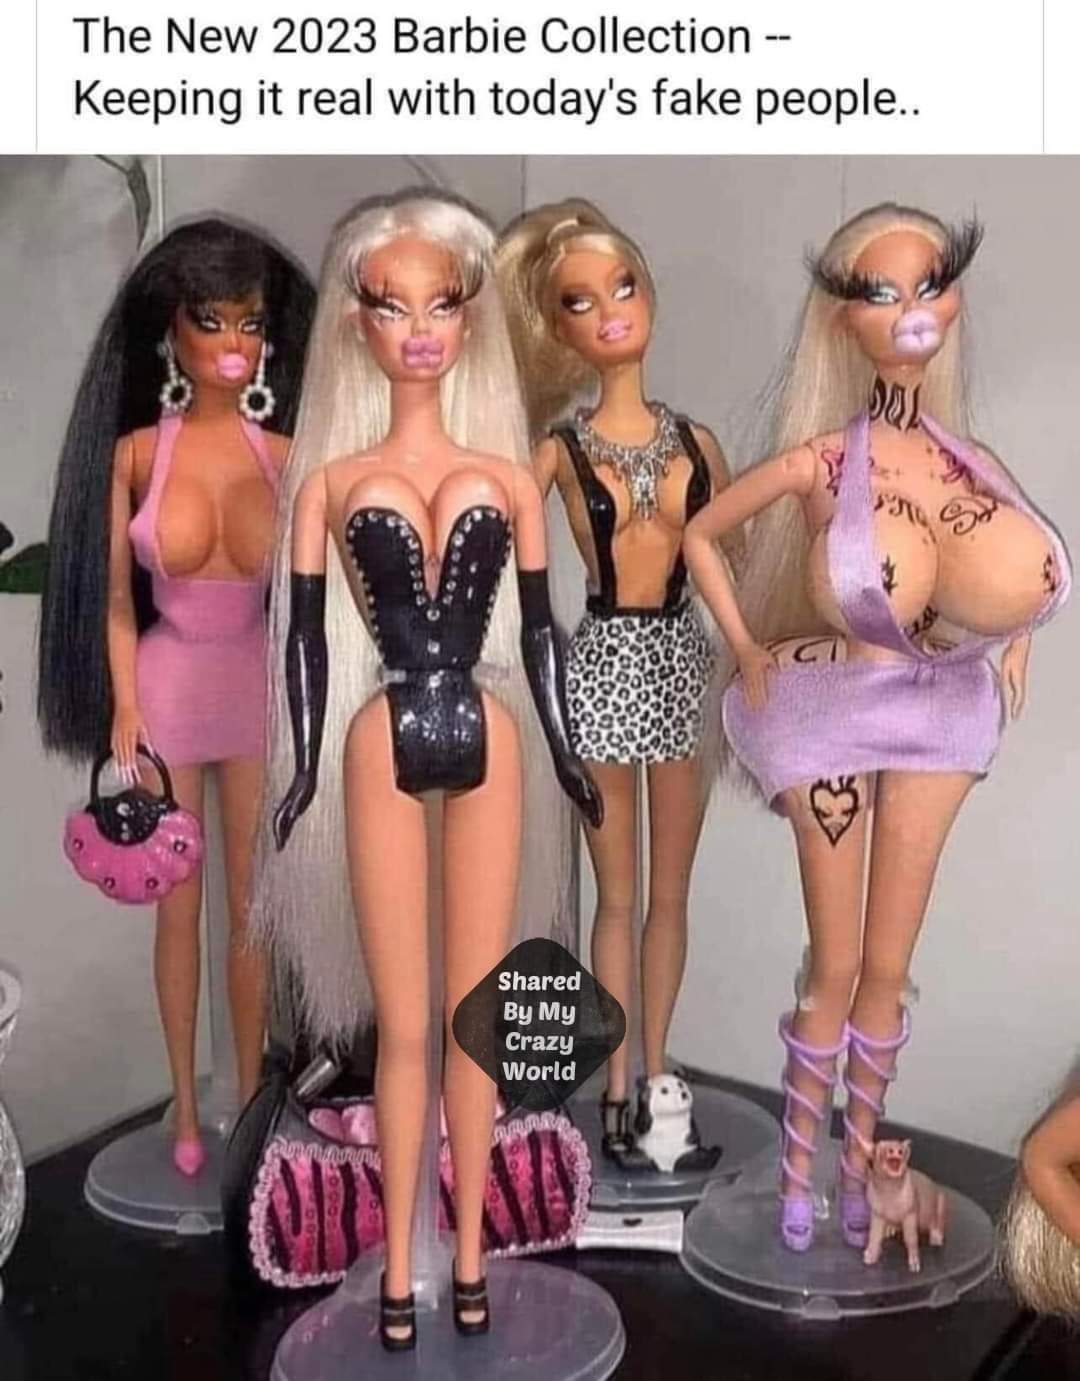 2023_barbie_collection.jpg